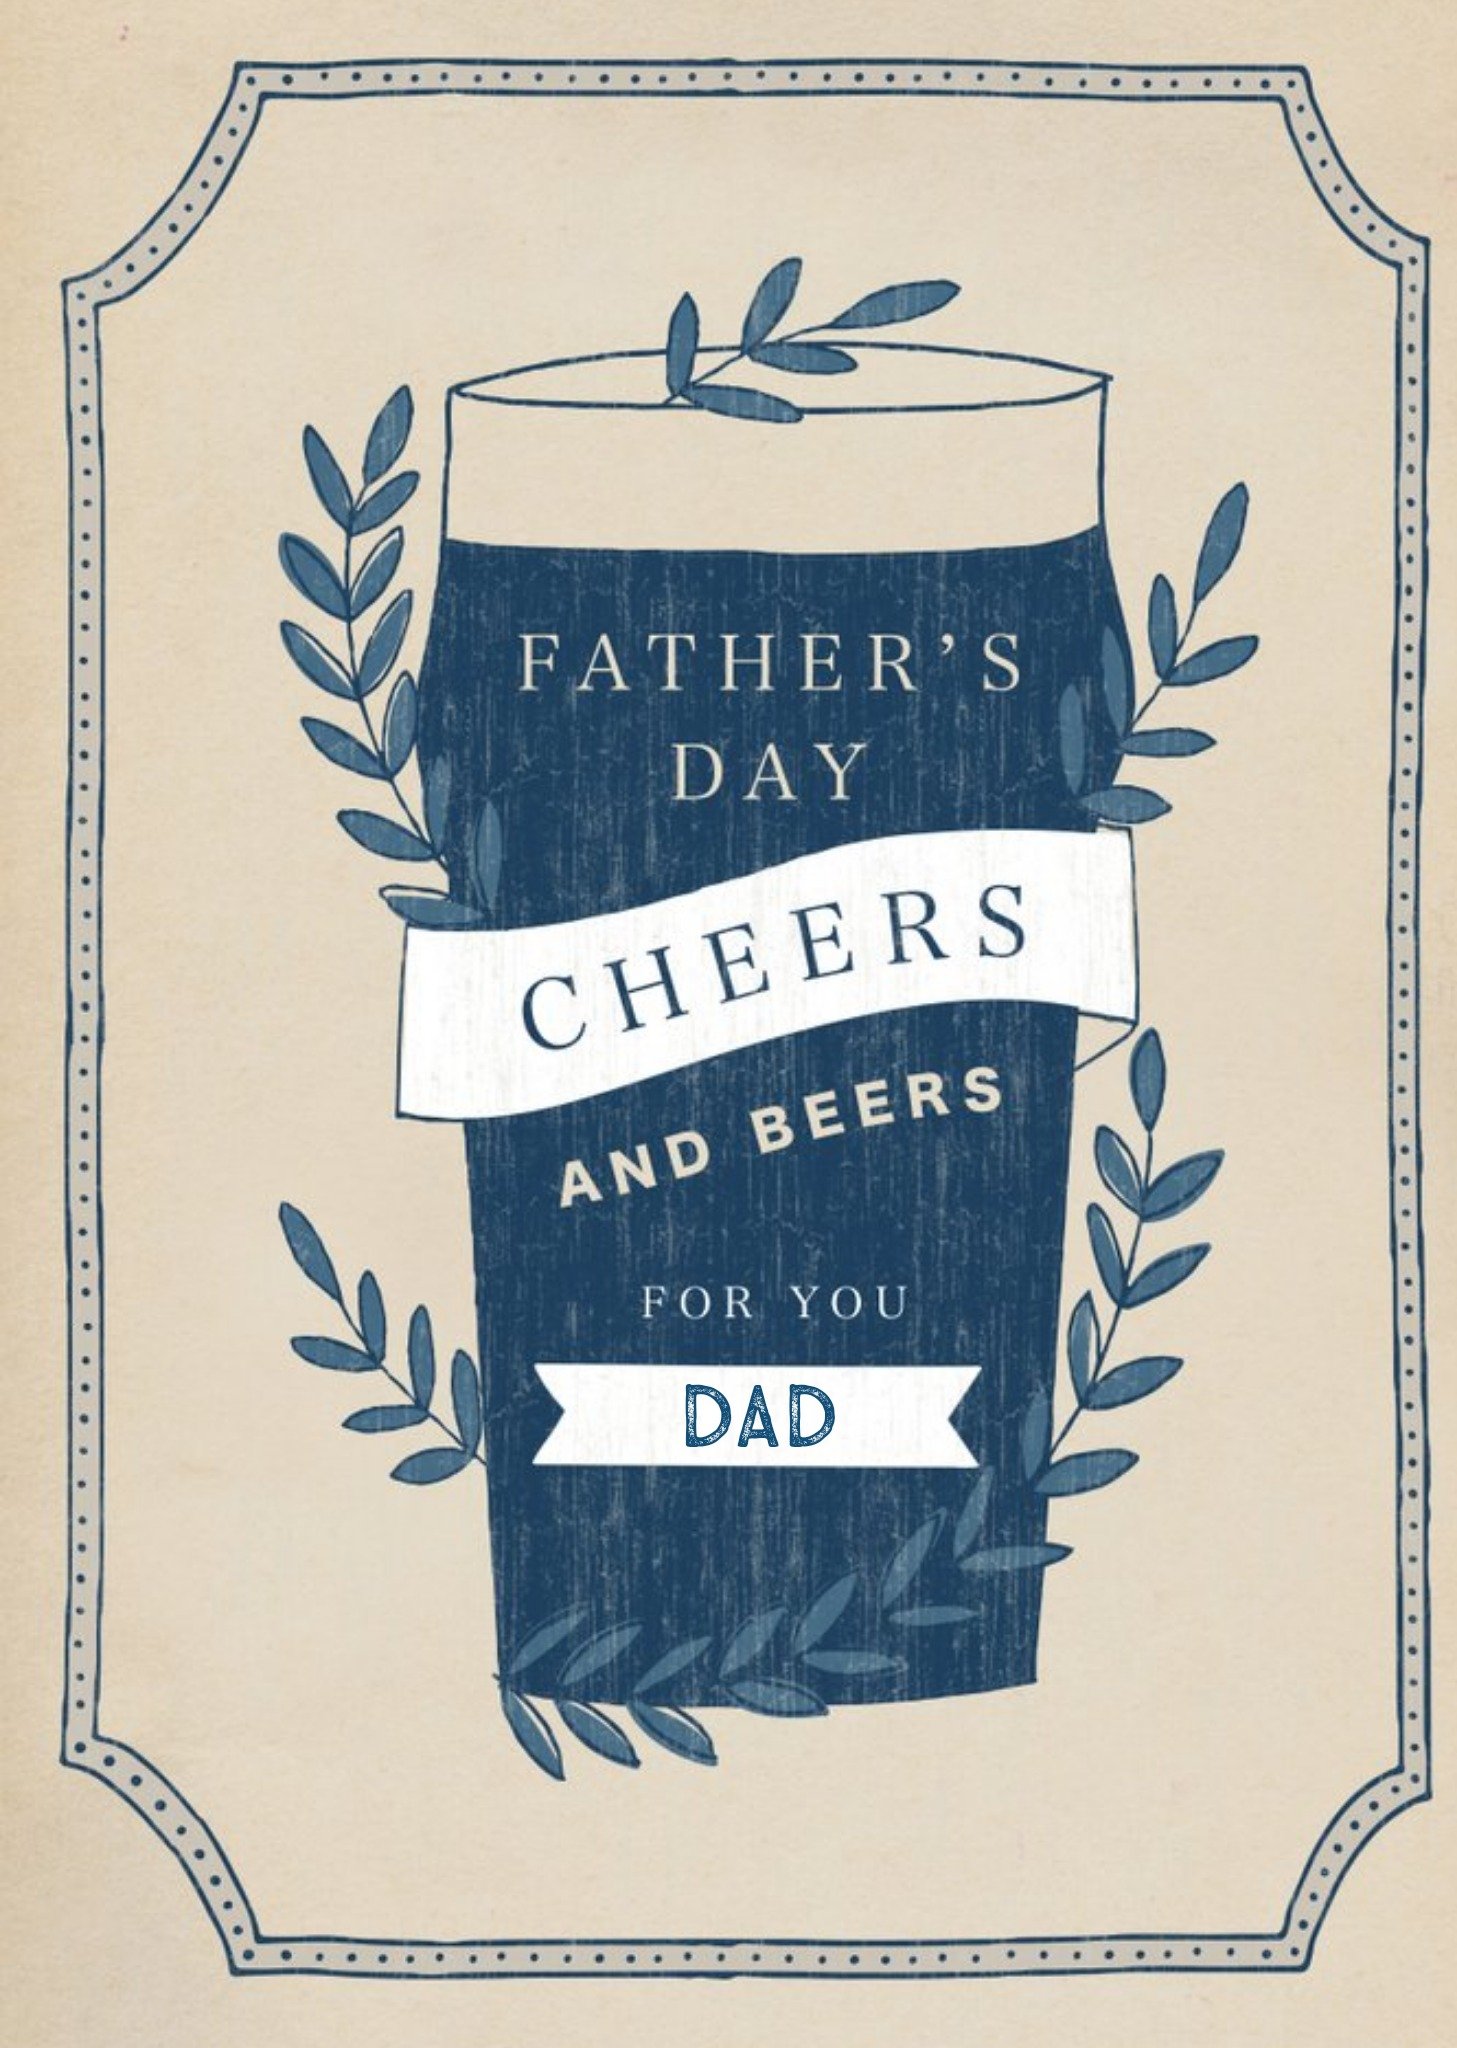 Moonpig Cheers & Beers For You Dad Happy Father's Day Card Ecard